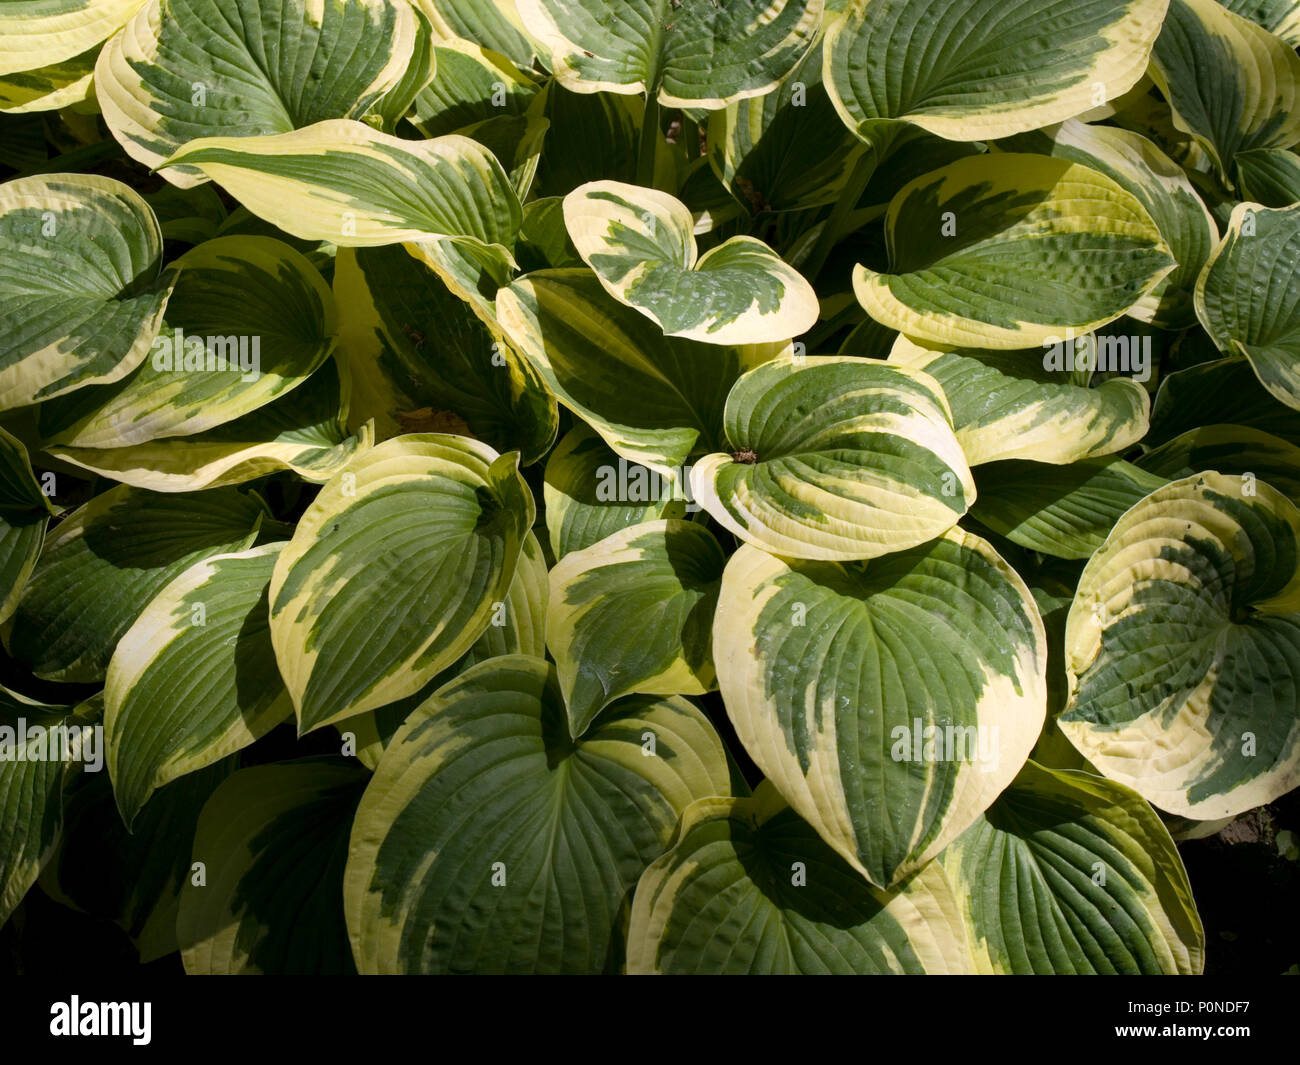 Plantain lilies in the park Stock Photo